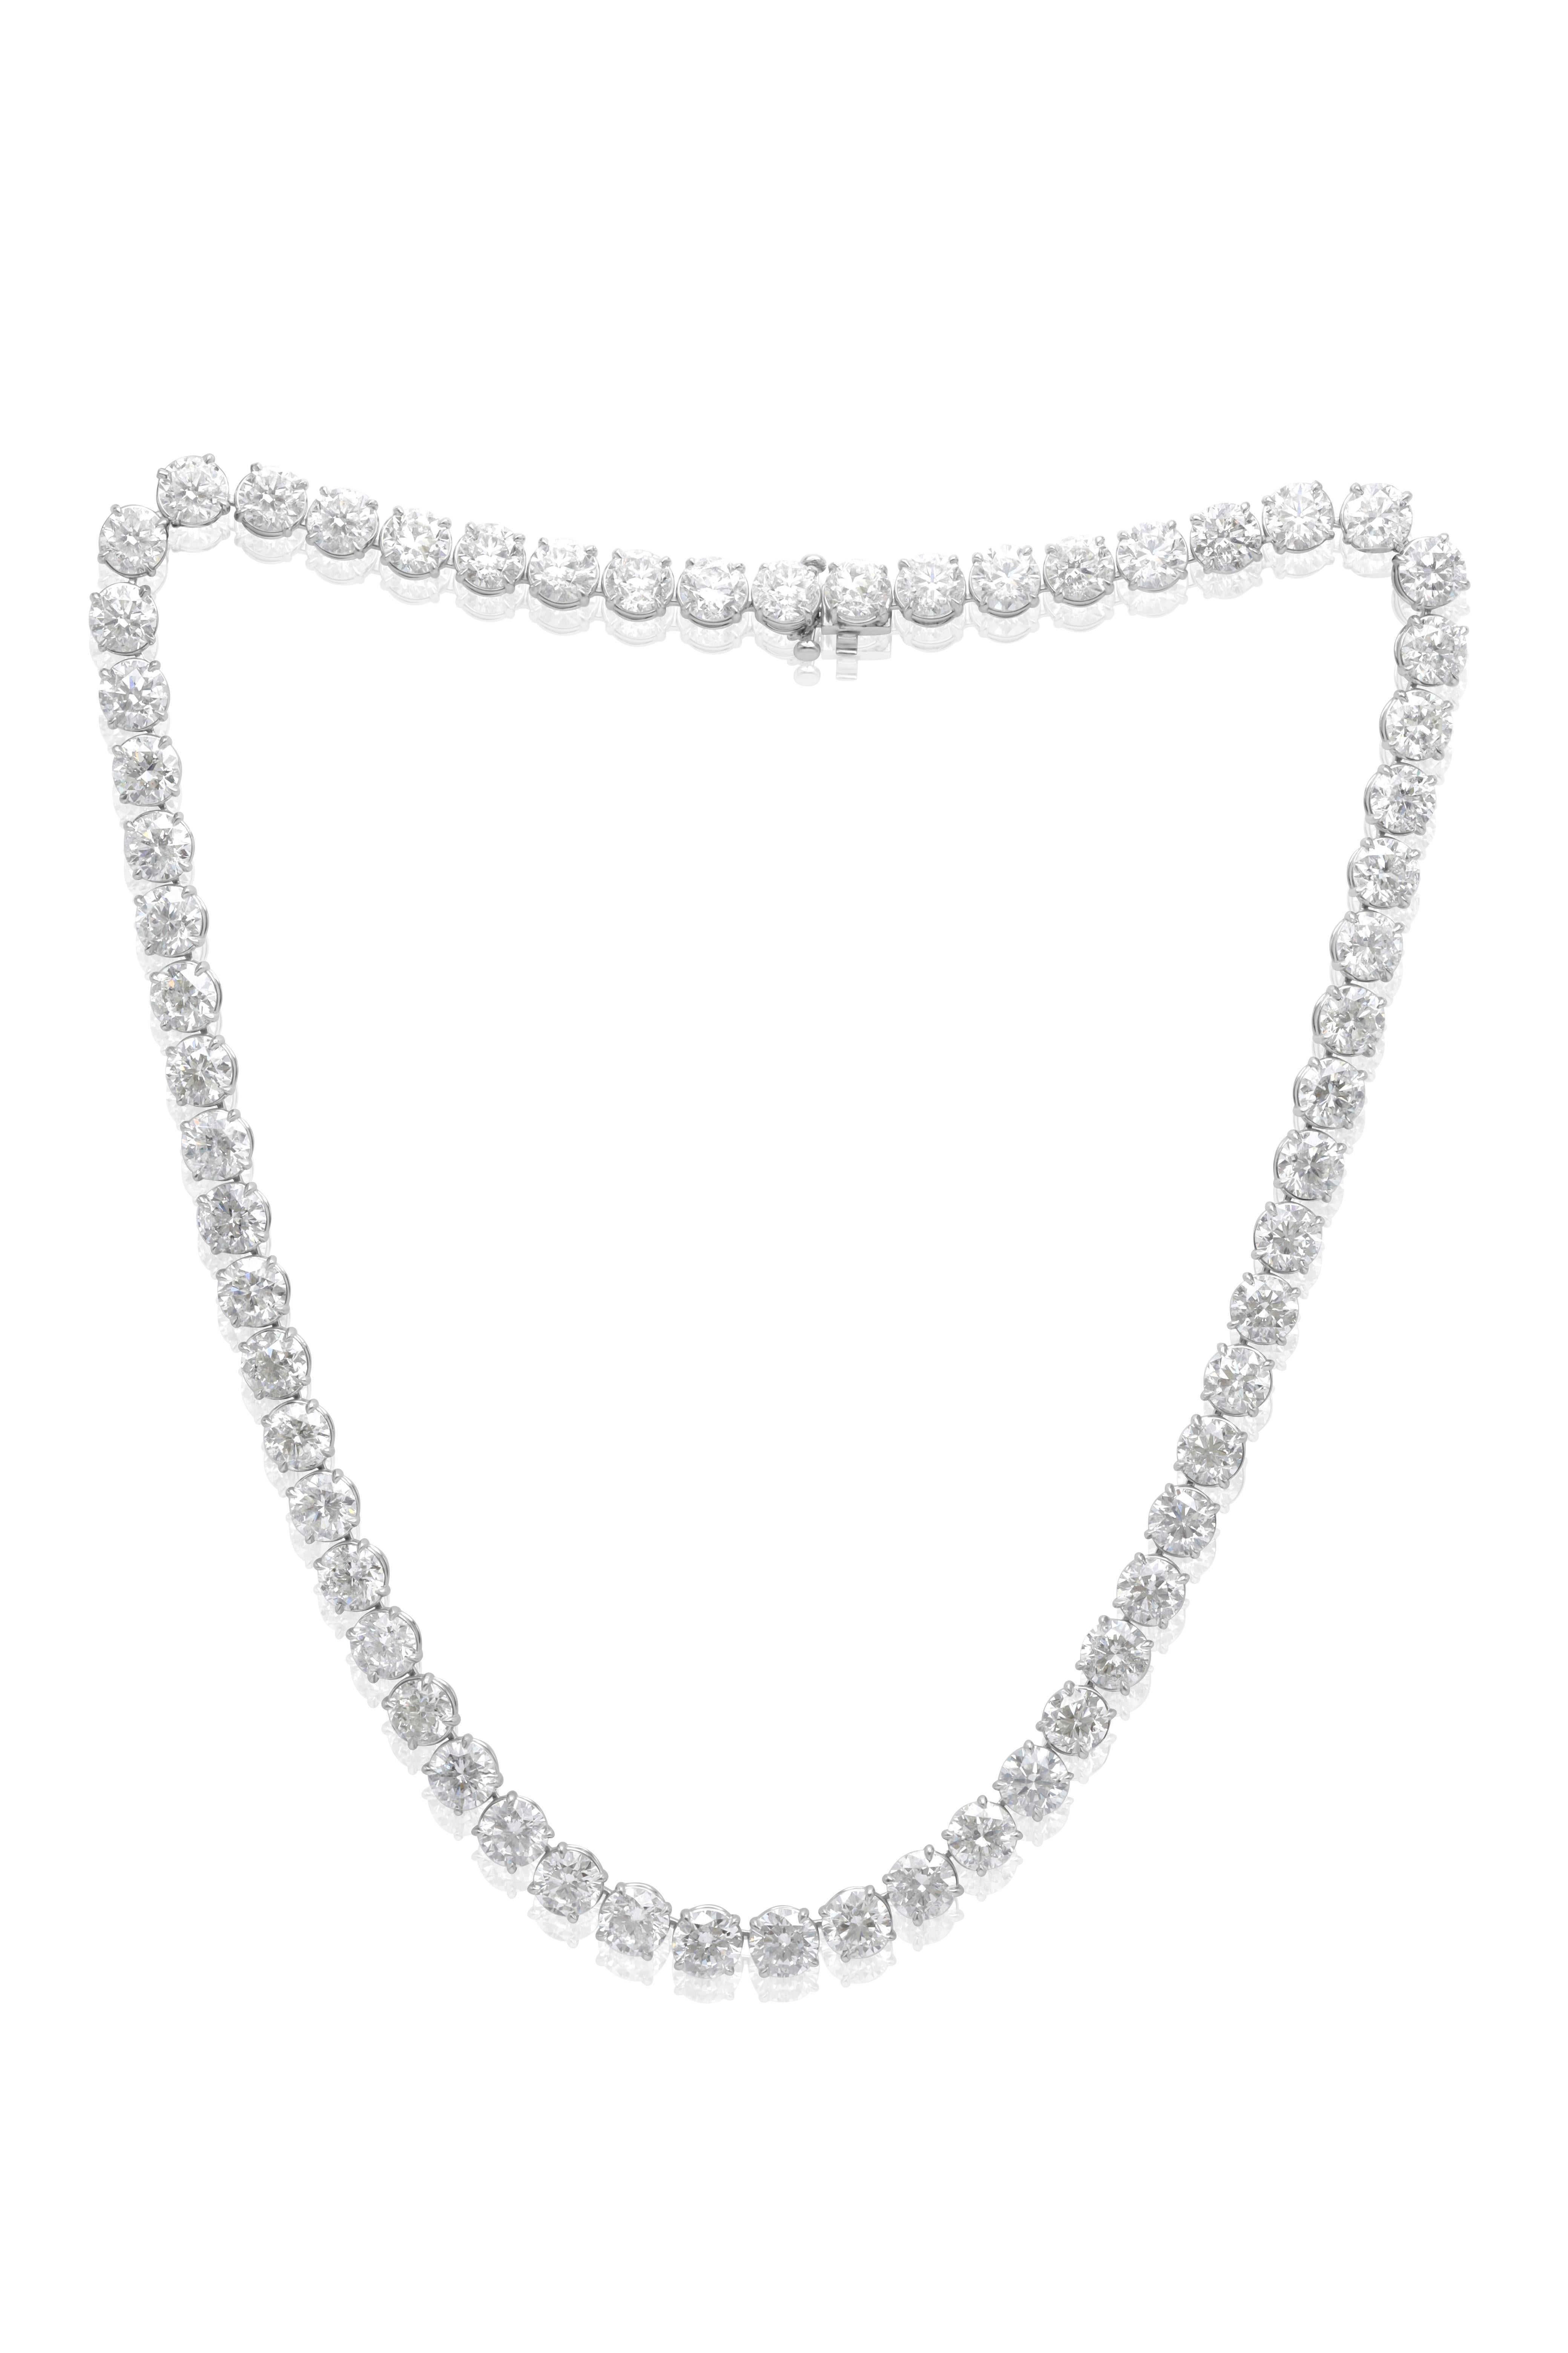 Modern Diana M. Custom 37.65 cts 4 Prong  Round Diamond 18k White Gold Tennis Necklace  For Sale